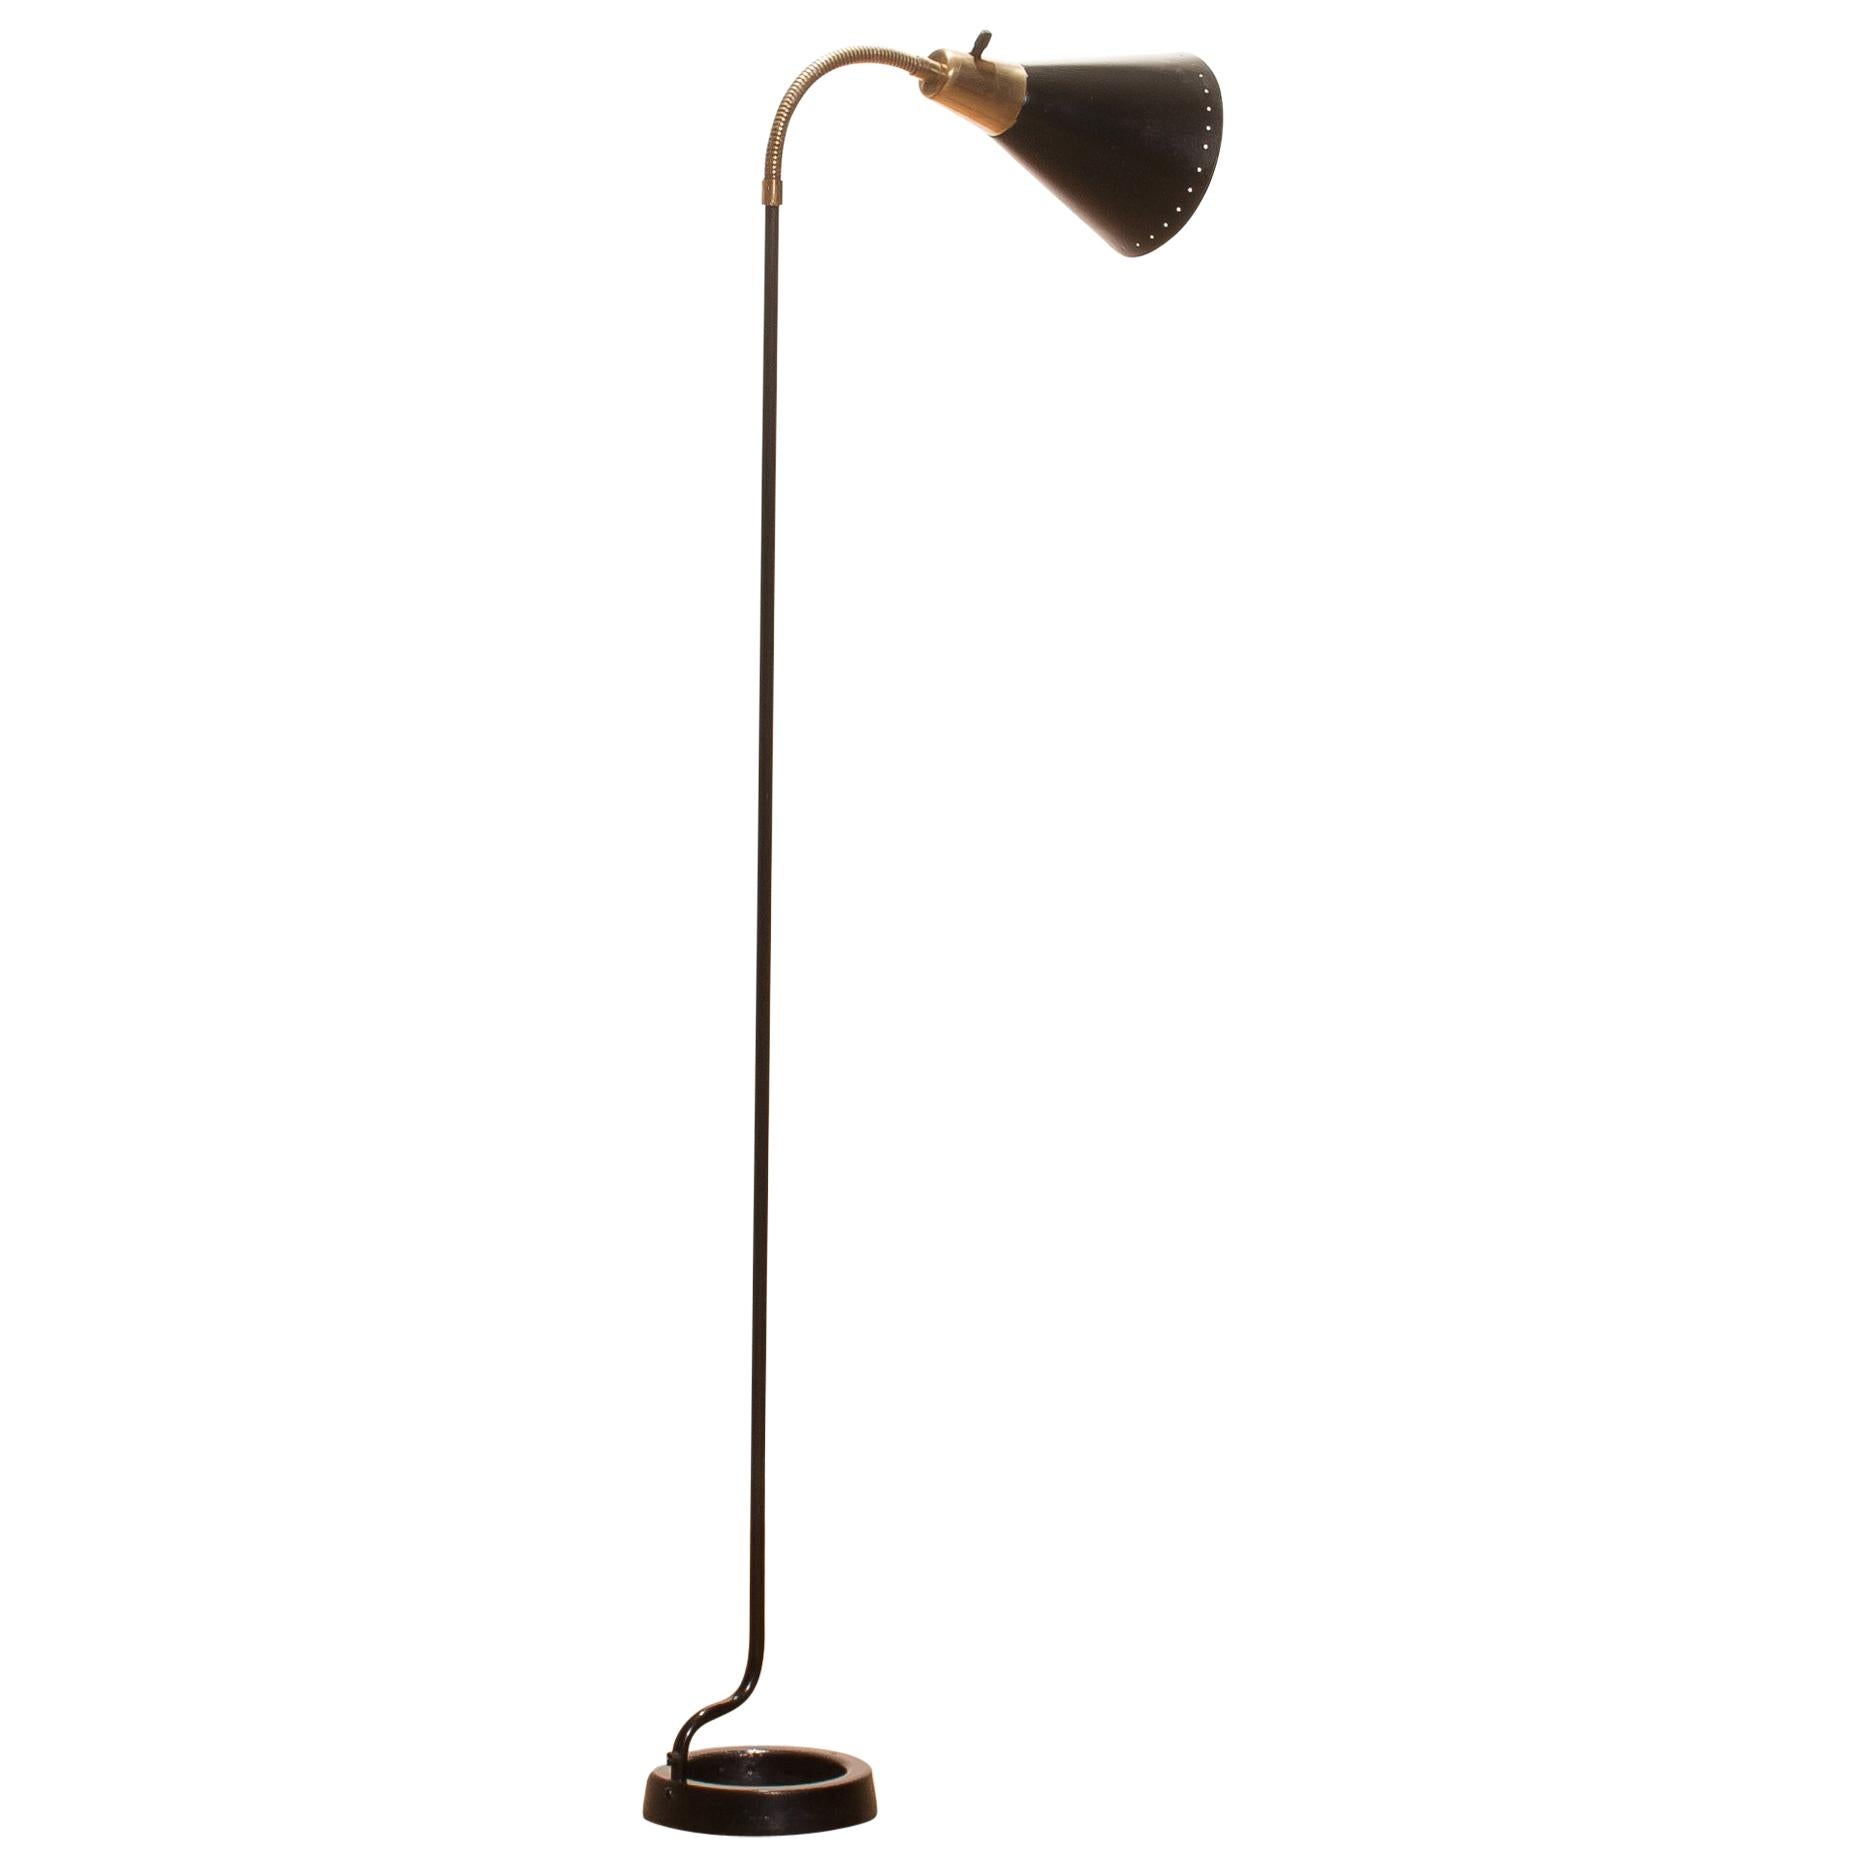 Beautiful floor lamp made in Sweden.
This lamp is made of black metal with brass details and has a very rare stand.
It has a perforated shade which gives a wonderful shining.
It is in an original and working condition.
Period 1940s.
Dimensions: